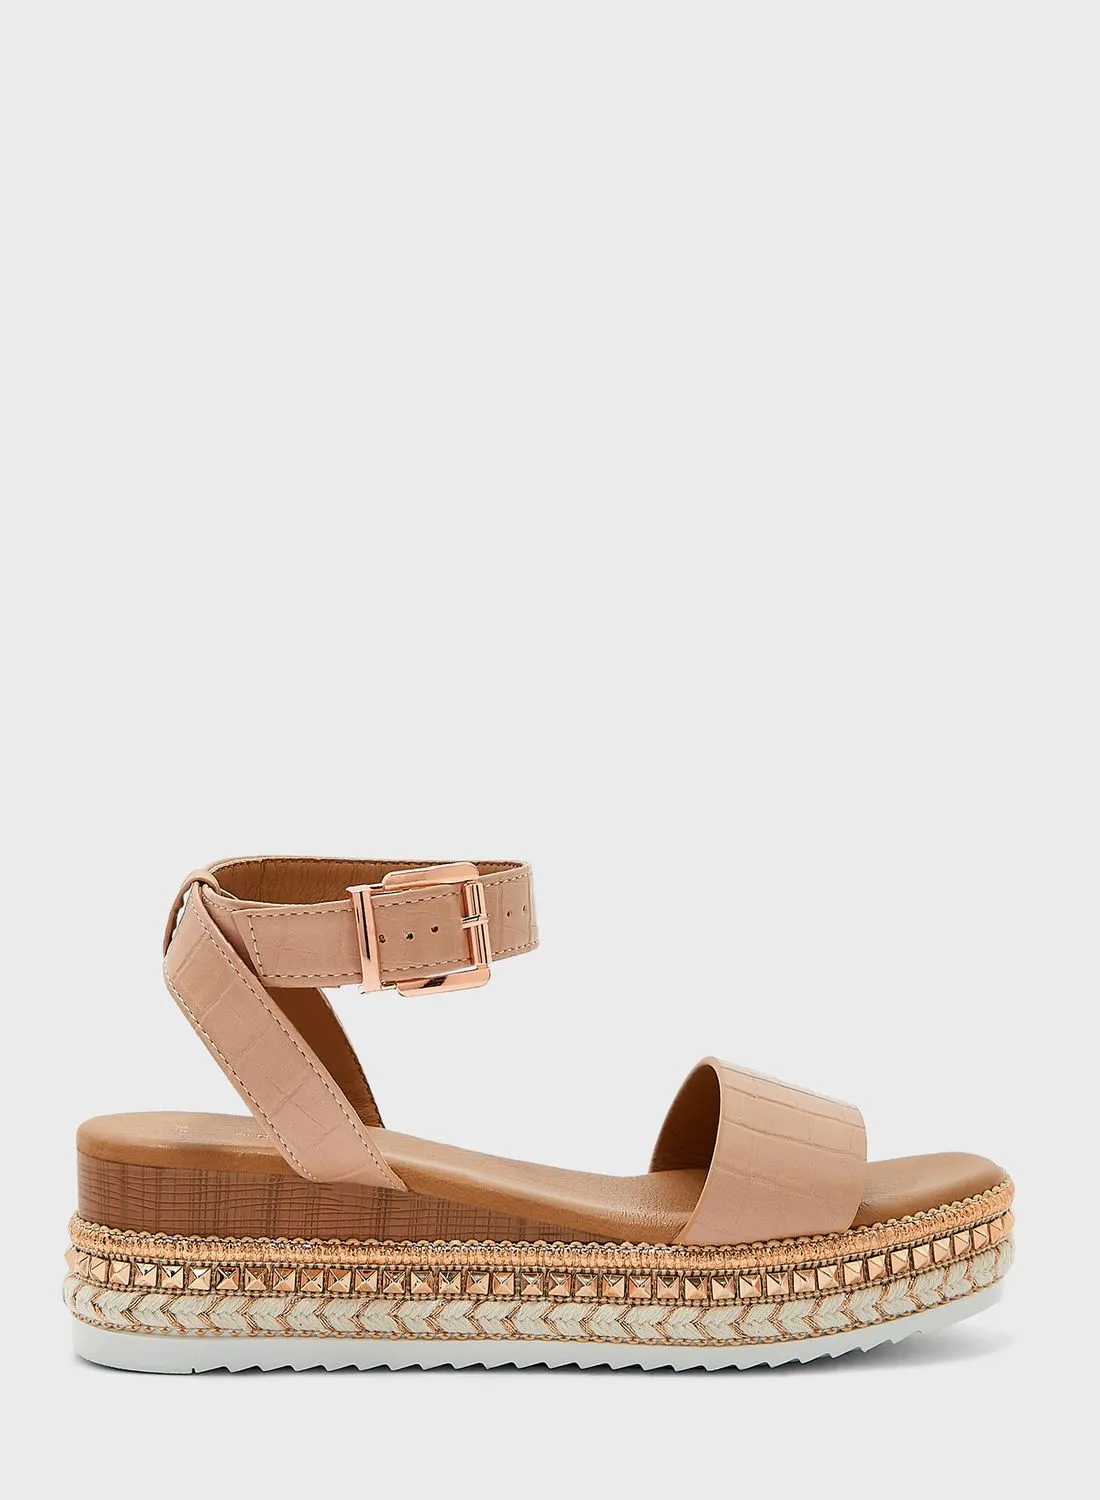 NEW LOOK Parry Ankle Strap Wedge Sandals